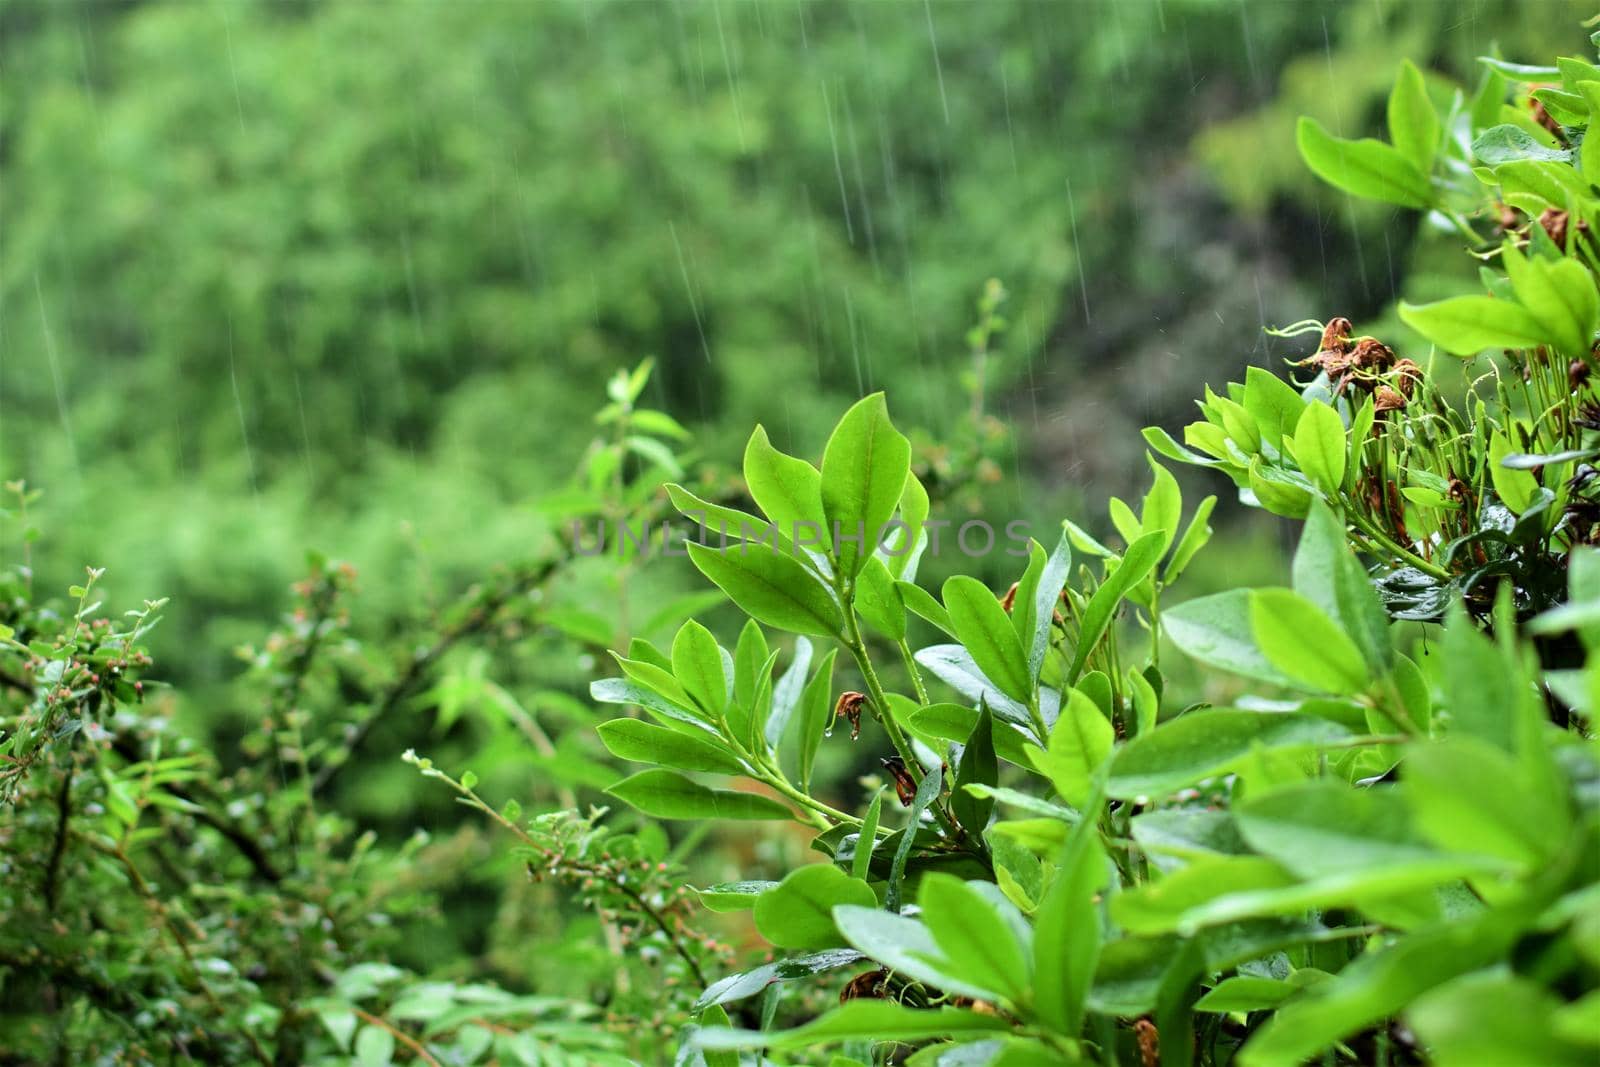 A green rhododendron bush in front of a hedge during bad weather with heavy rain